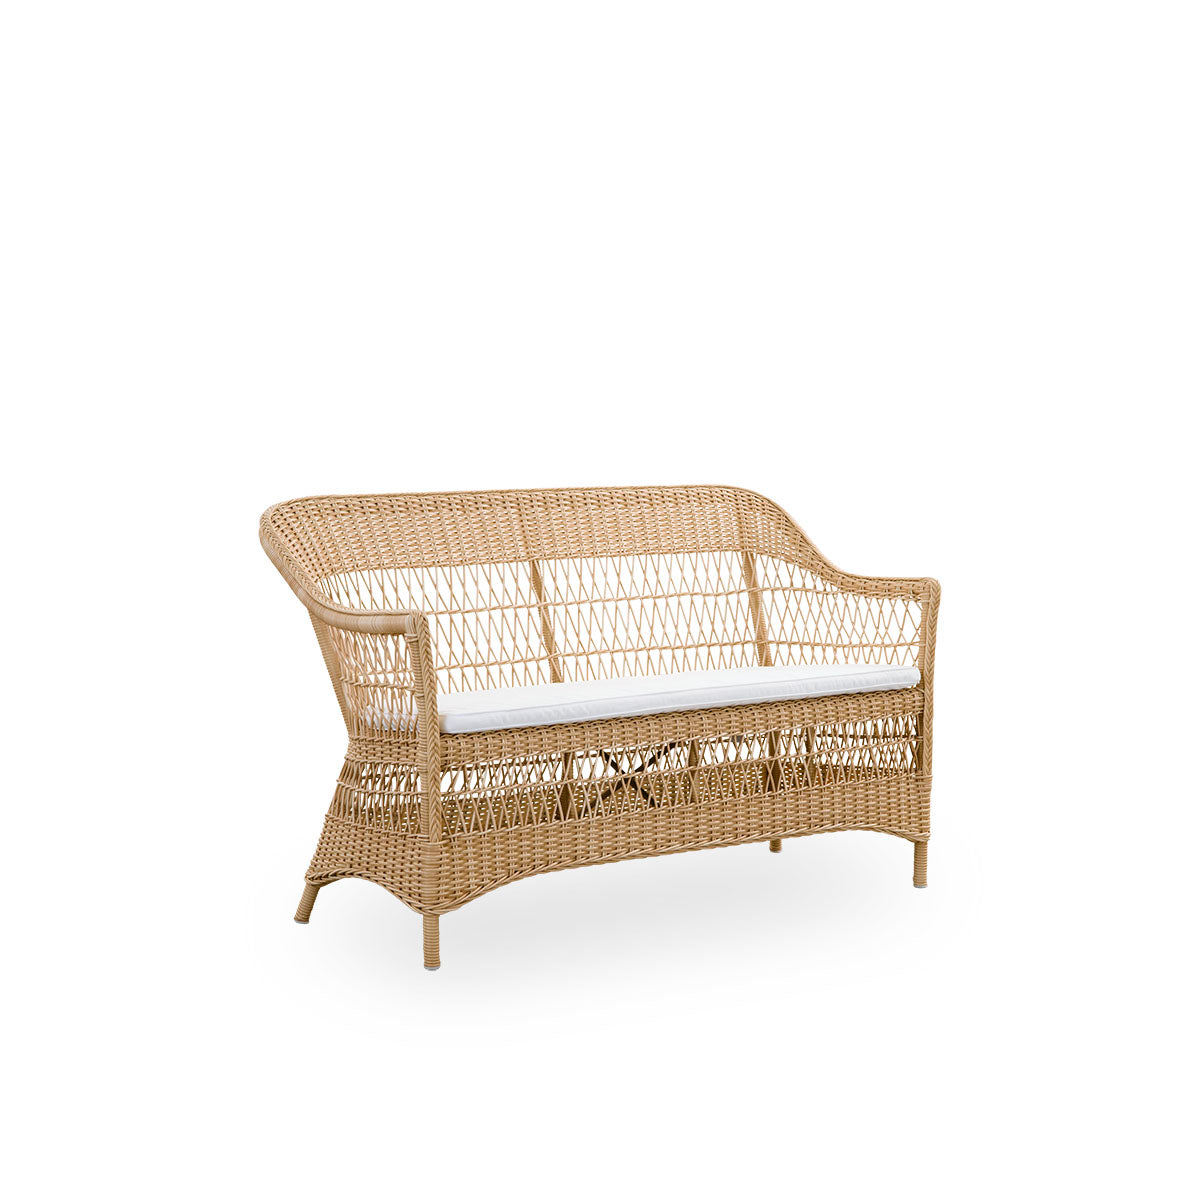 Charlot 2-Seater Garden Sofa by Sika